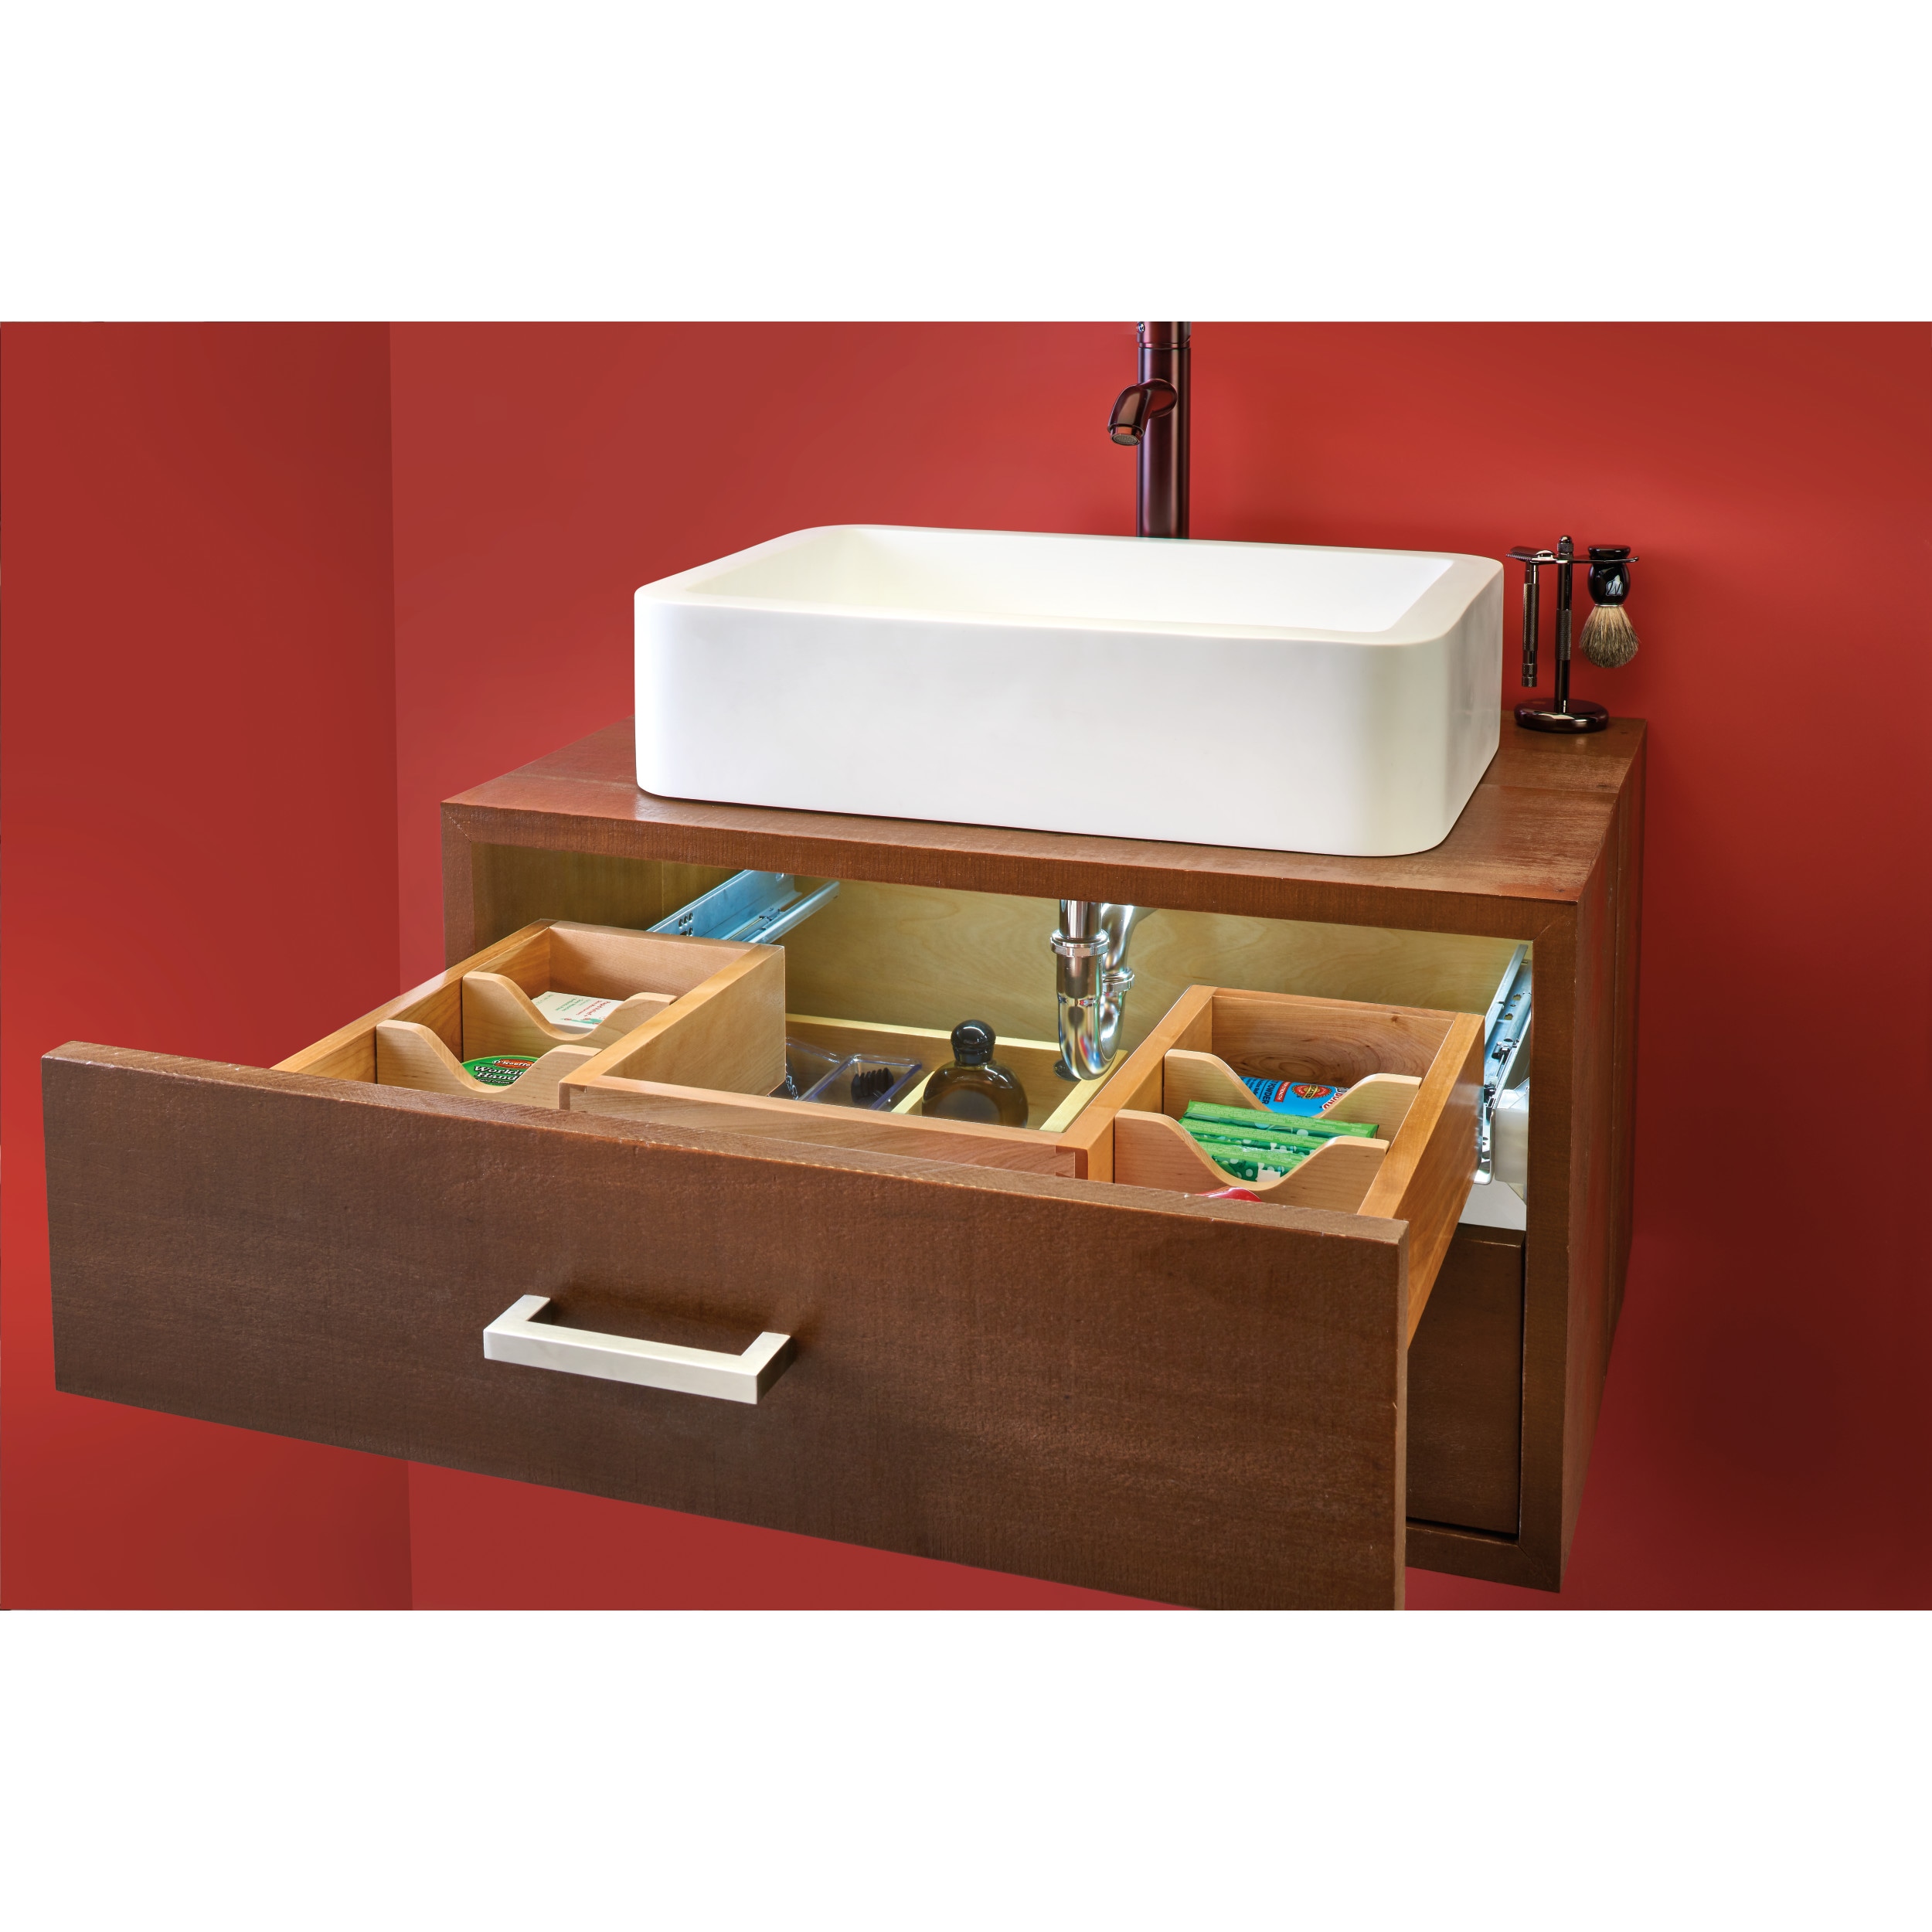 Rev-A-Shelf 8-3/4 Inch Width L-Shape Reversible Under Sink Pull-Out  Organizer for 24 Inch Vanity Sink Base Cabinets, Natural, Min. Cabinet  Opening: 9-1/4W x 19-1/2D x 19-1/2H 441-12VSBSC-1